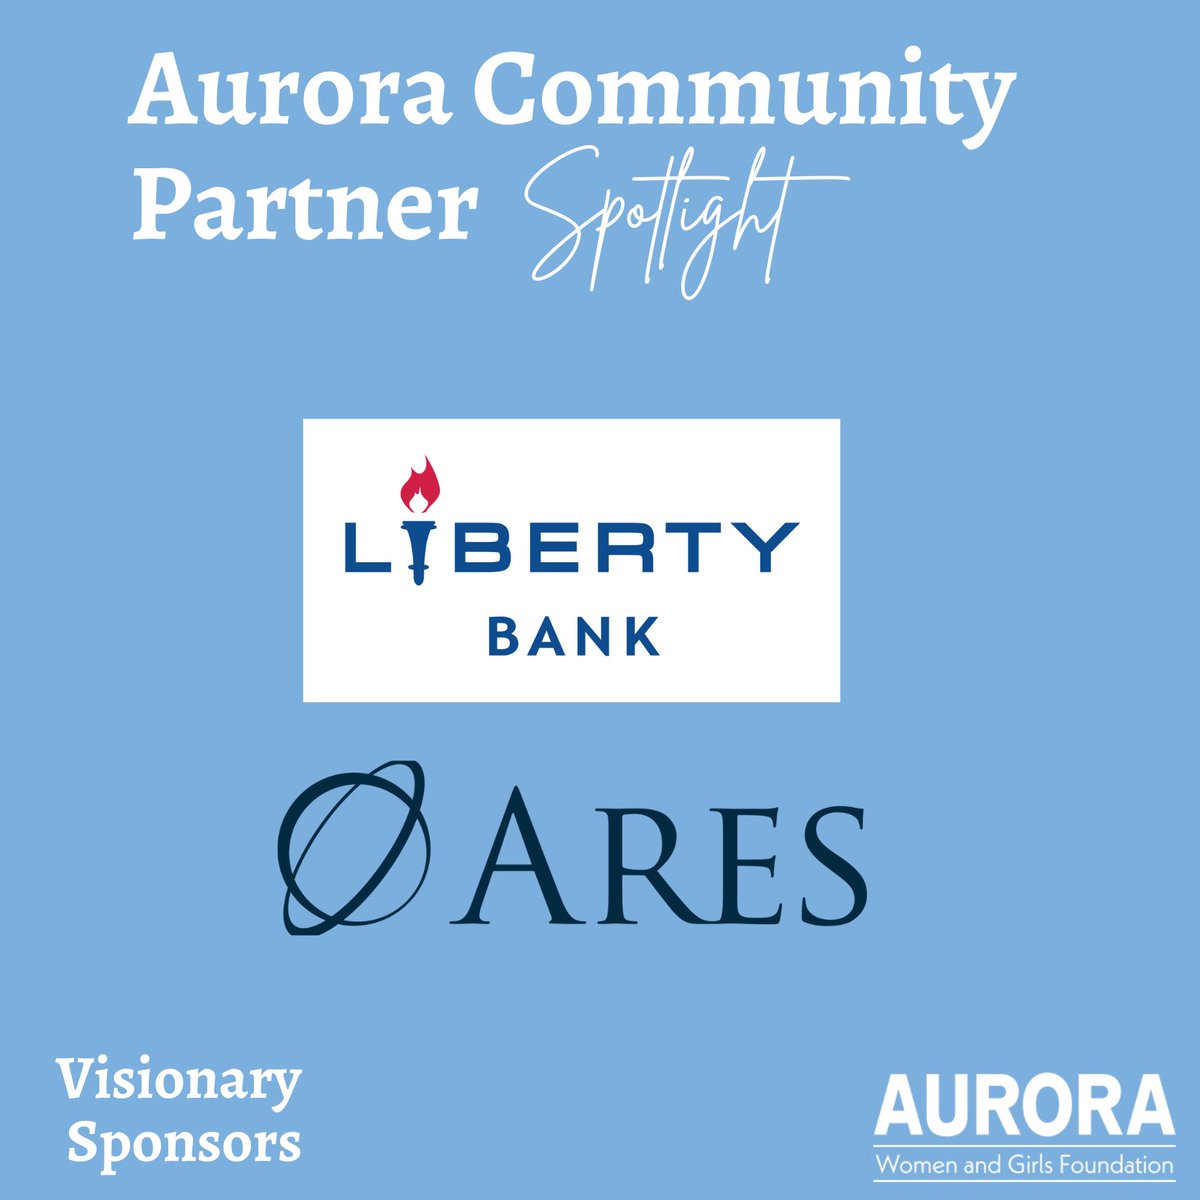 We had a great night on October 4th honoring our Luminaries. Thank you to all of our sponsors for helping make it a successful and impactful eventing!
 
#AuroraWomen #Luminaries #StrongWomen #StrongCommunities